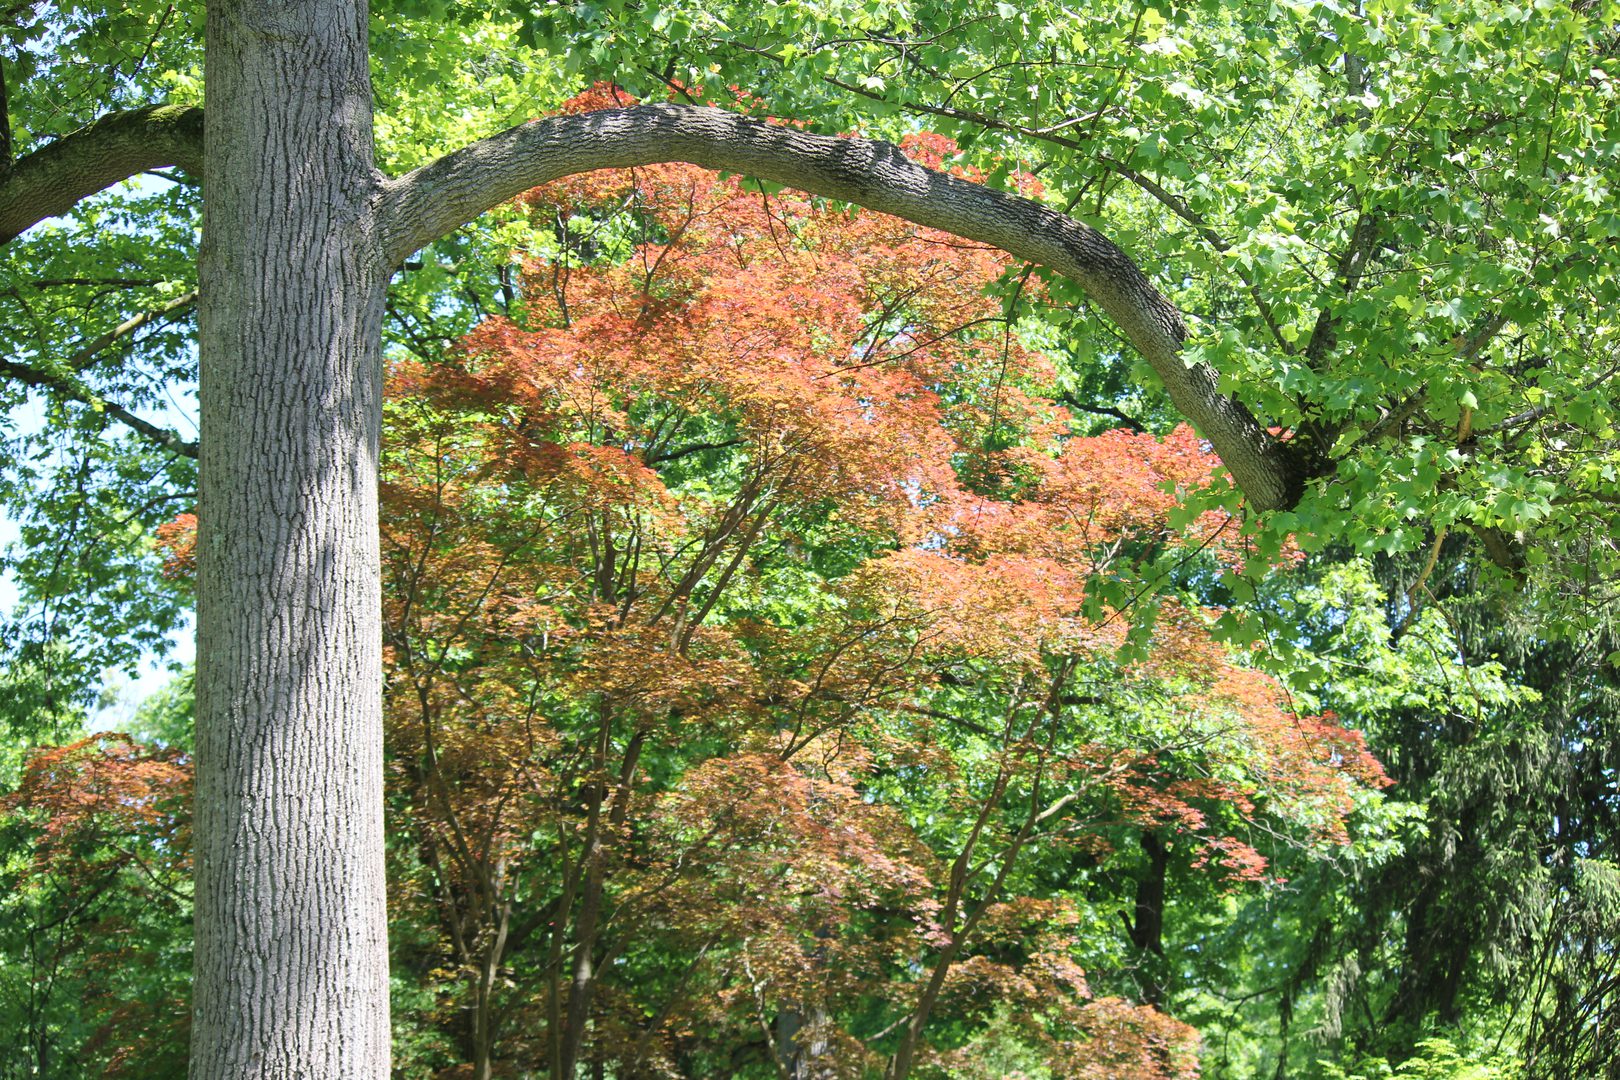 A view of a tree with red leaves